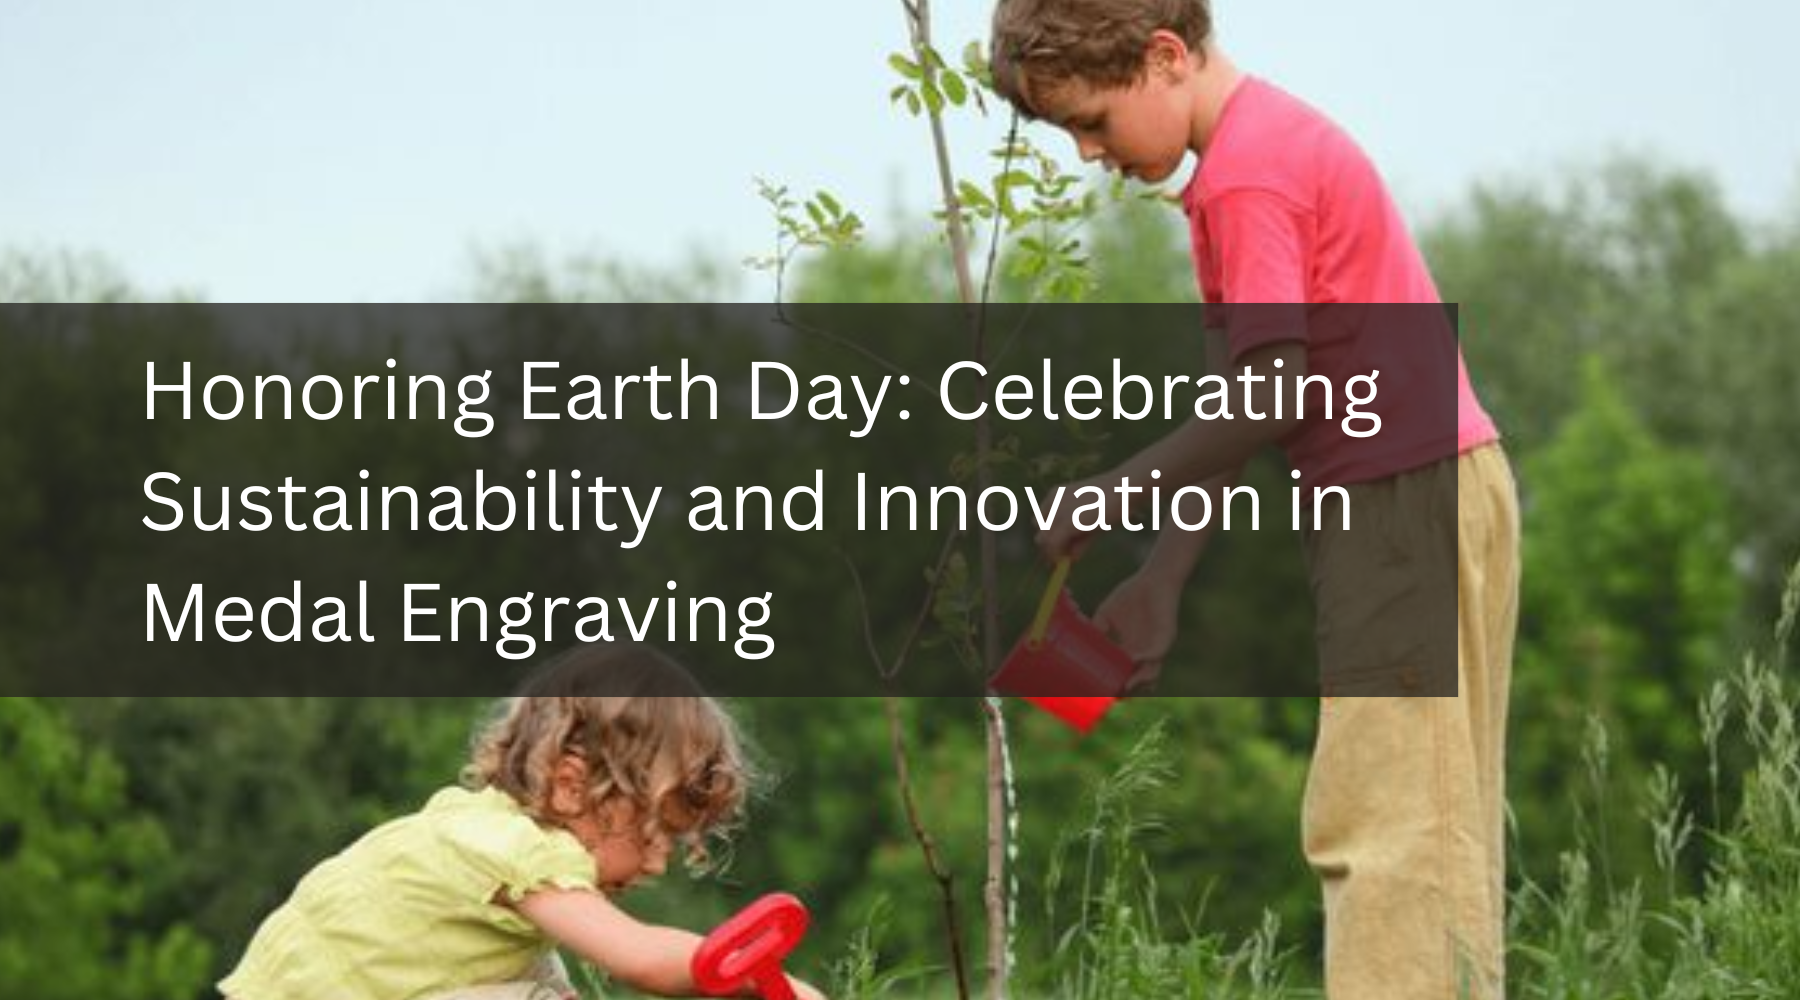 Honoring Earth Day: Celebrating Sustainability and Innovation in Medal Engraving